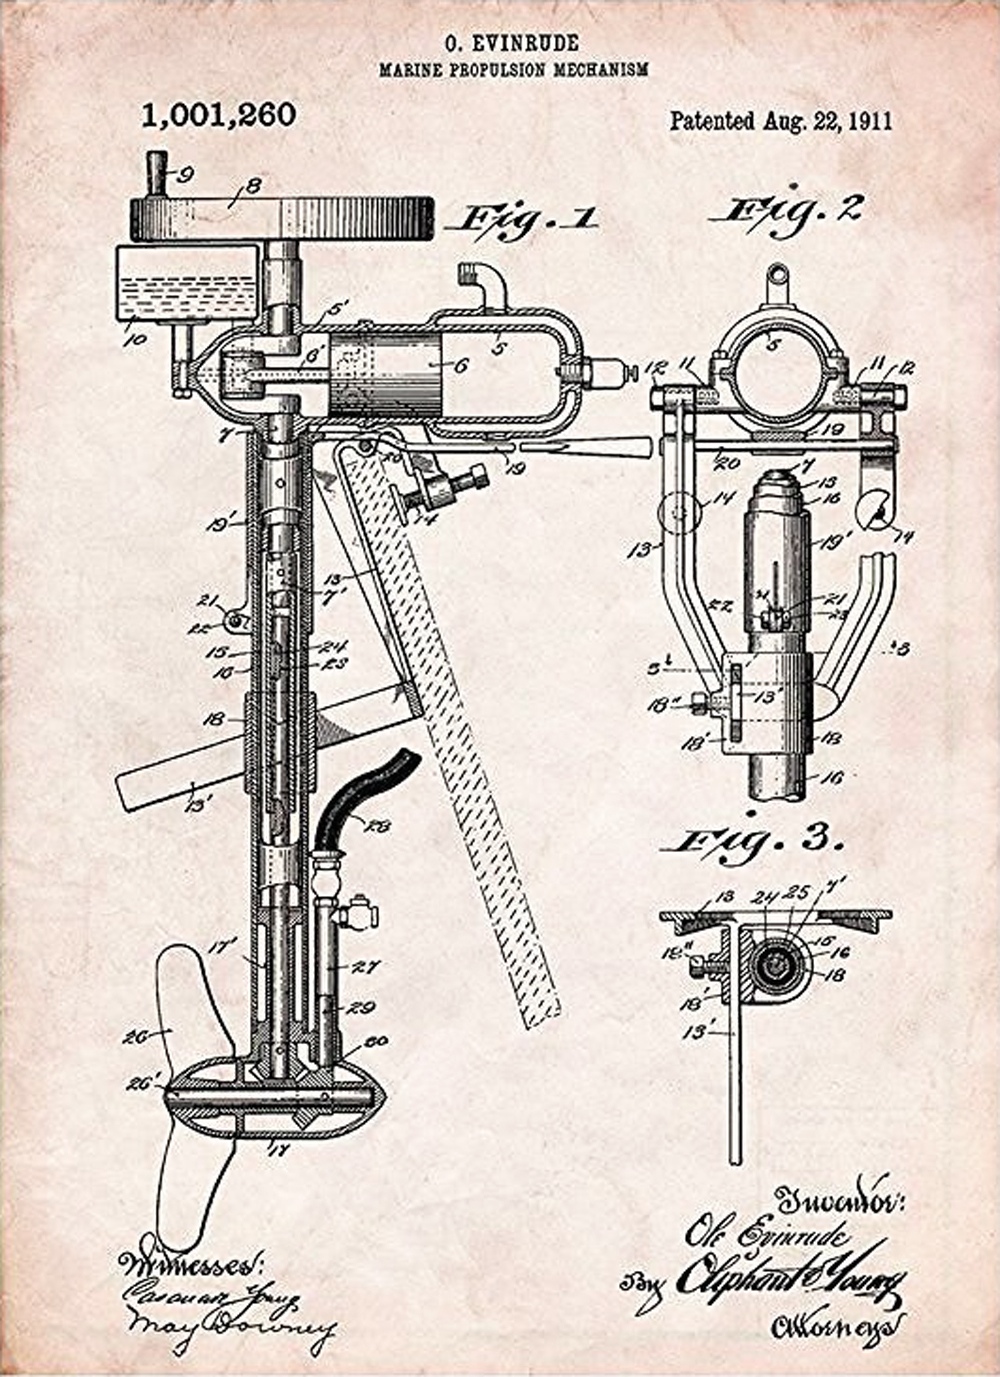 Evinrude Patent #1,001,260 awarded on August 22, 1911.